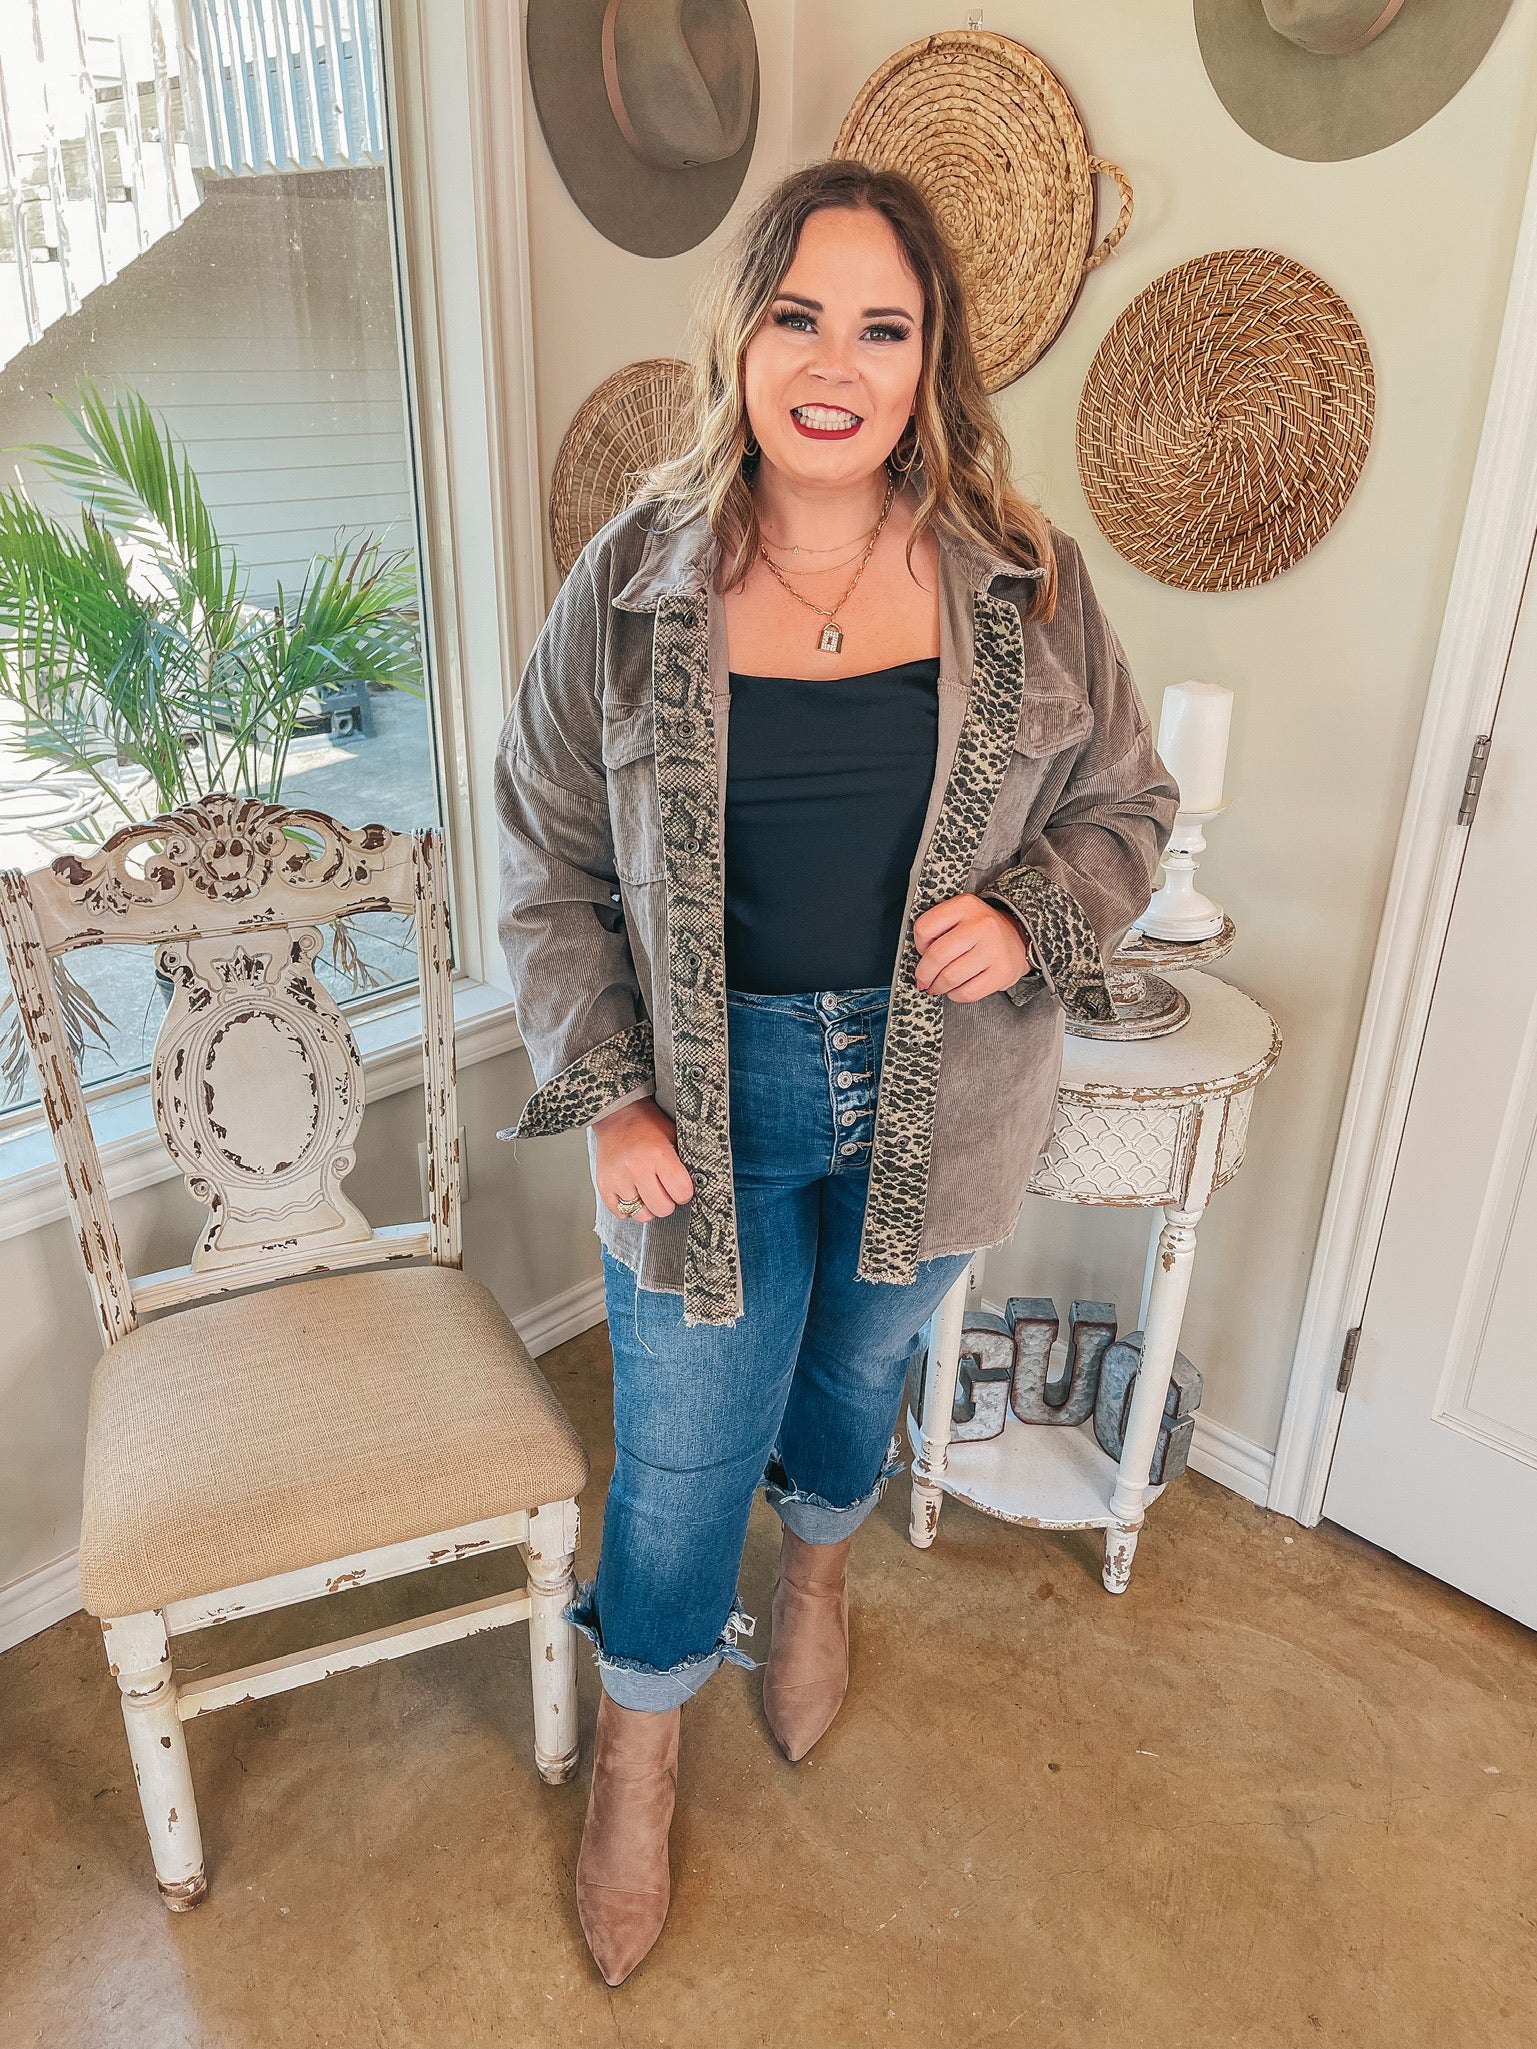 Plus Sizes | Deer Valley Resort Corduroy Shacket with Animal Print Trim in Stone Grey - Giddy Up Glamour Boutique